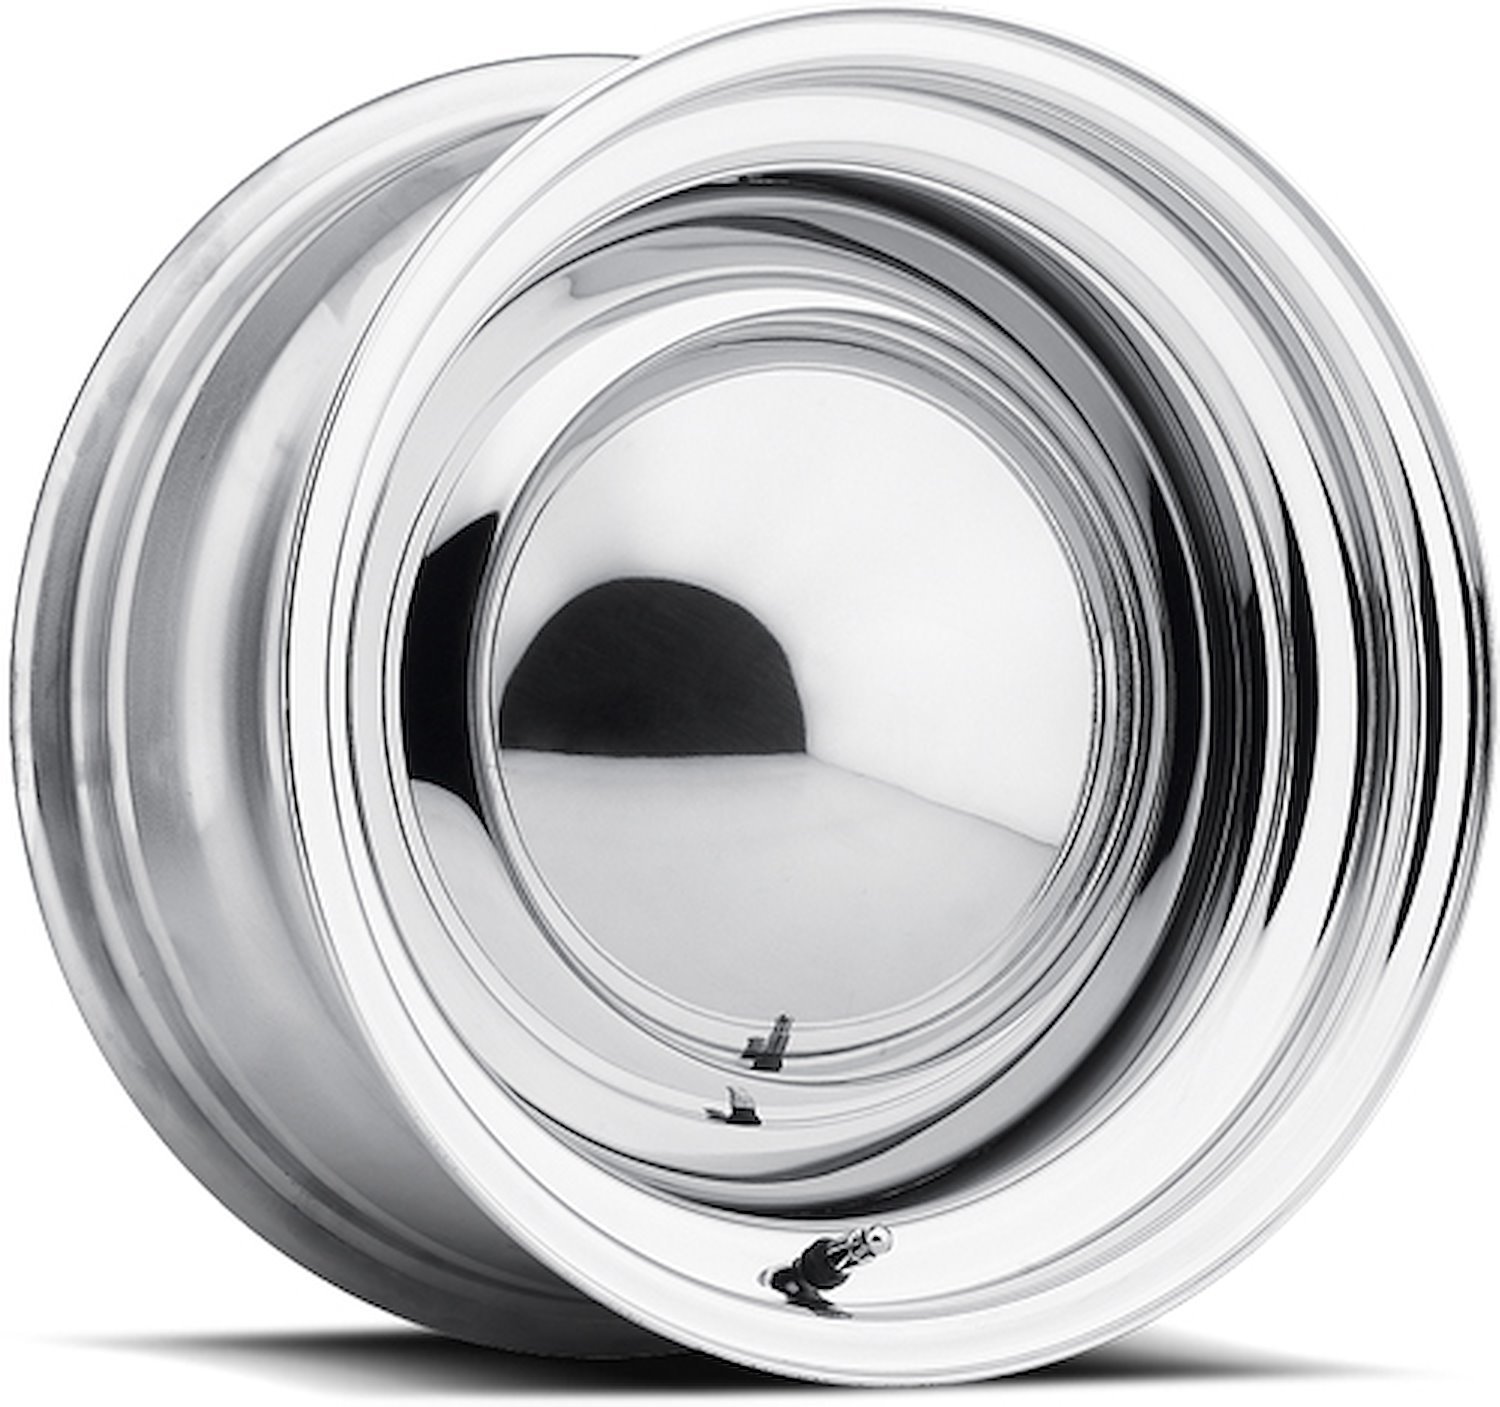 Solid Wheel Chrome 15X14 5X45 5X475 Bolt Circle 5 Back Spacing 63 offset 319 Center Bore 1500 lbs Load Rating